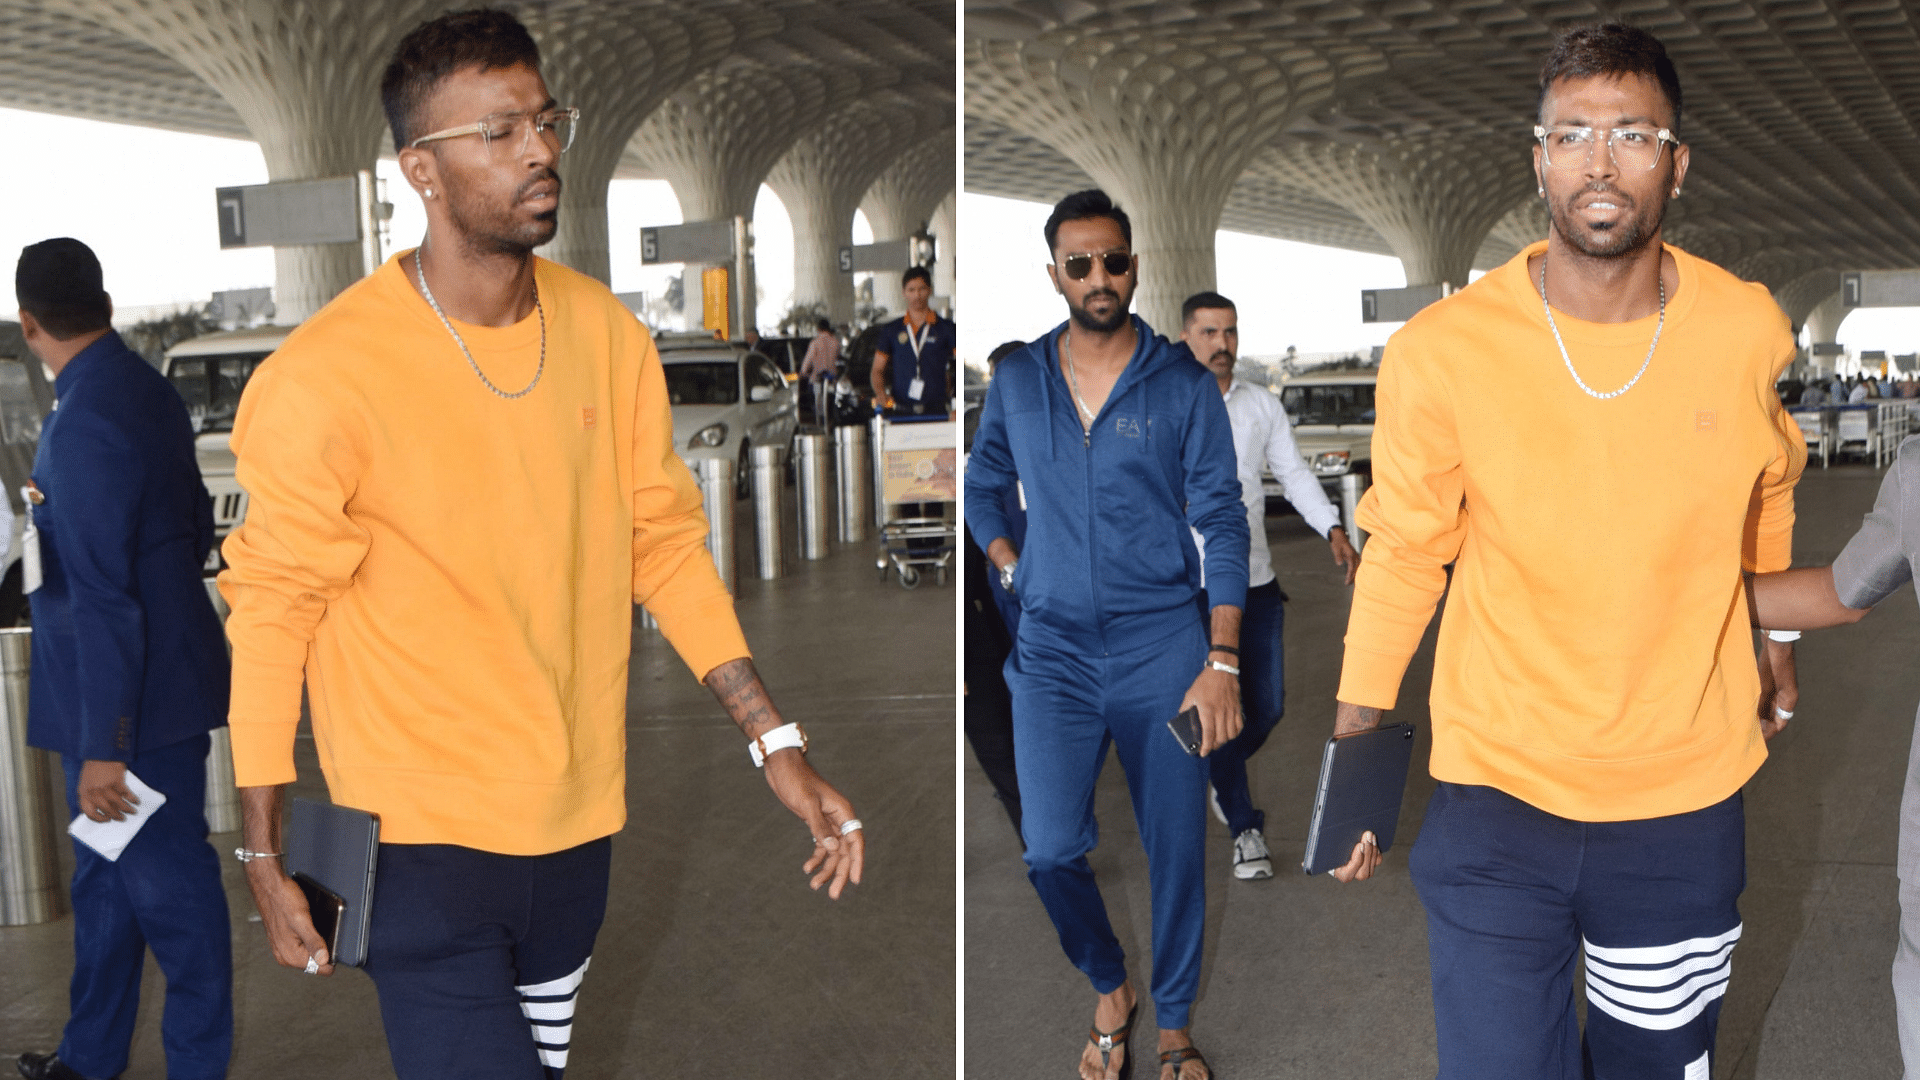 Hardik Pandya spotted at the Mumbai airport in his first public appearance since the ‘Koffee With Karan’ controversy.